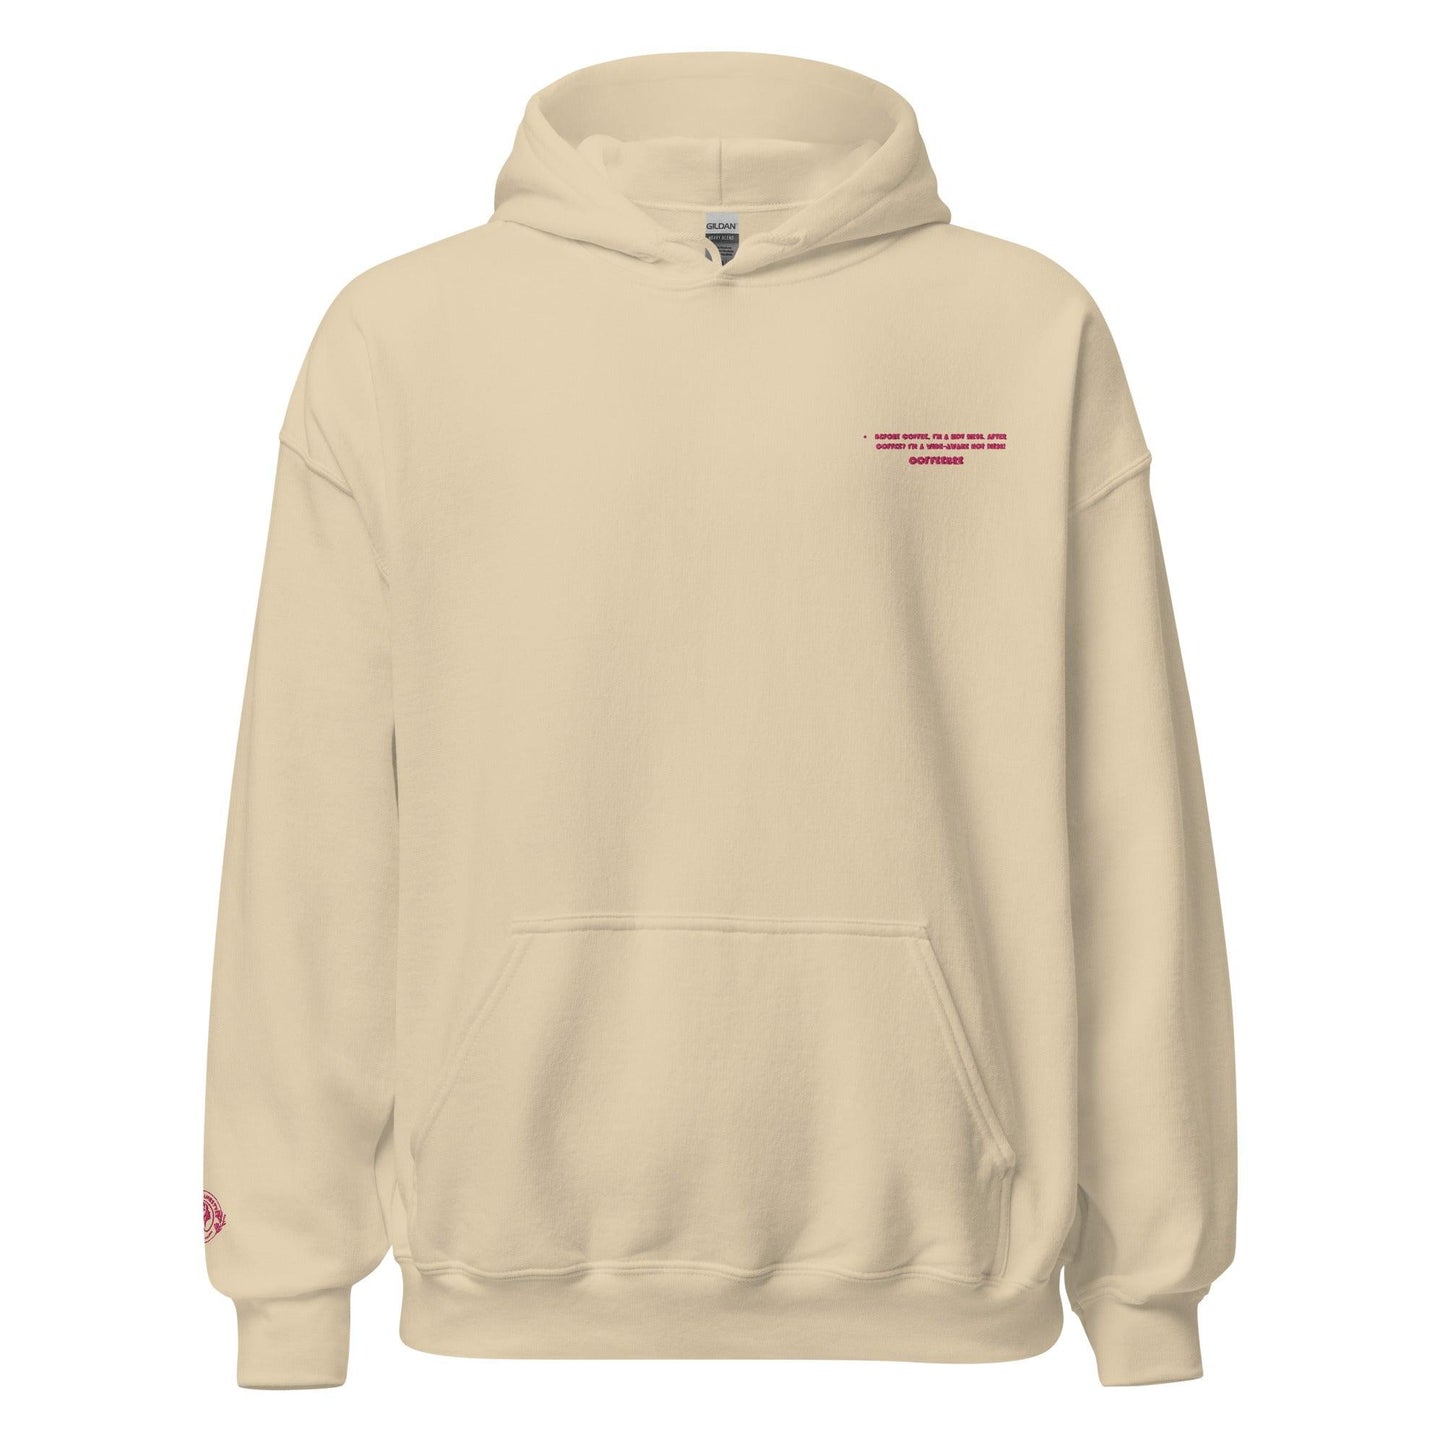 Embroidered Text Print Unisex Hoodie - COFFEEBRE